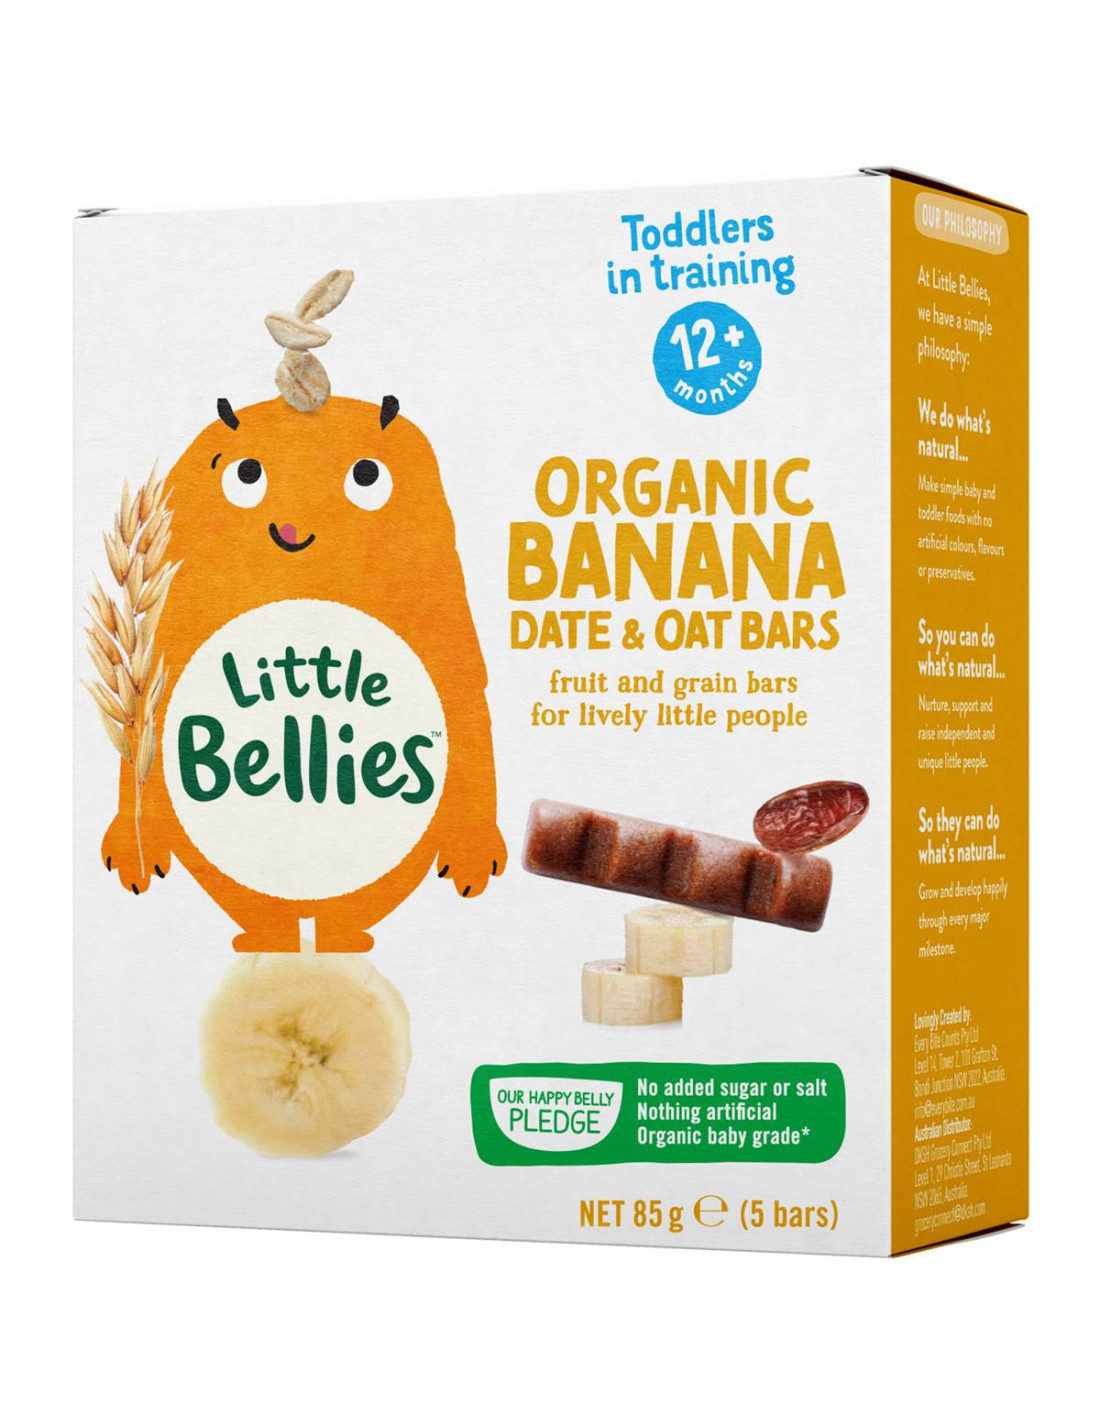 Kiddylicious Banana Fruity Puffs 10g, Healthy & Vegetable Chips, Chips,  Snacks & Popcorn, Food Cupboard, Food